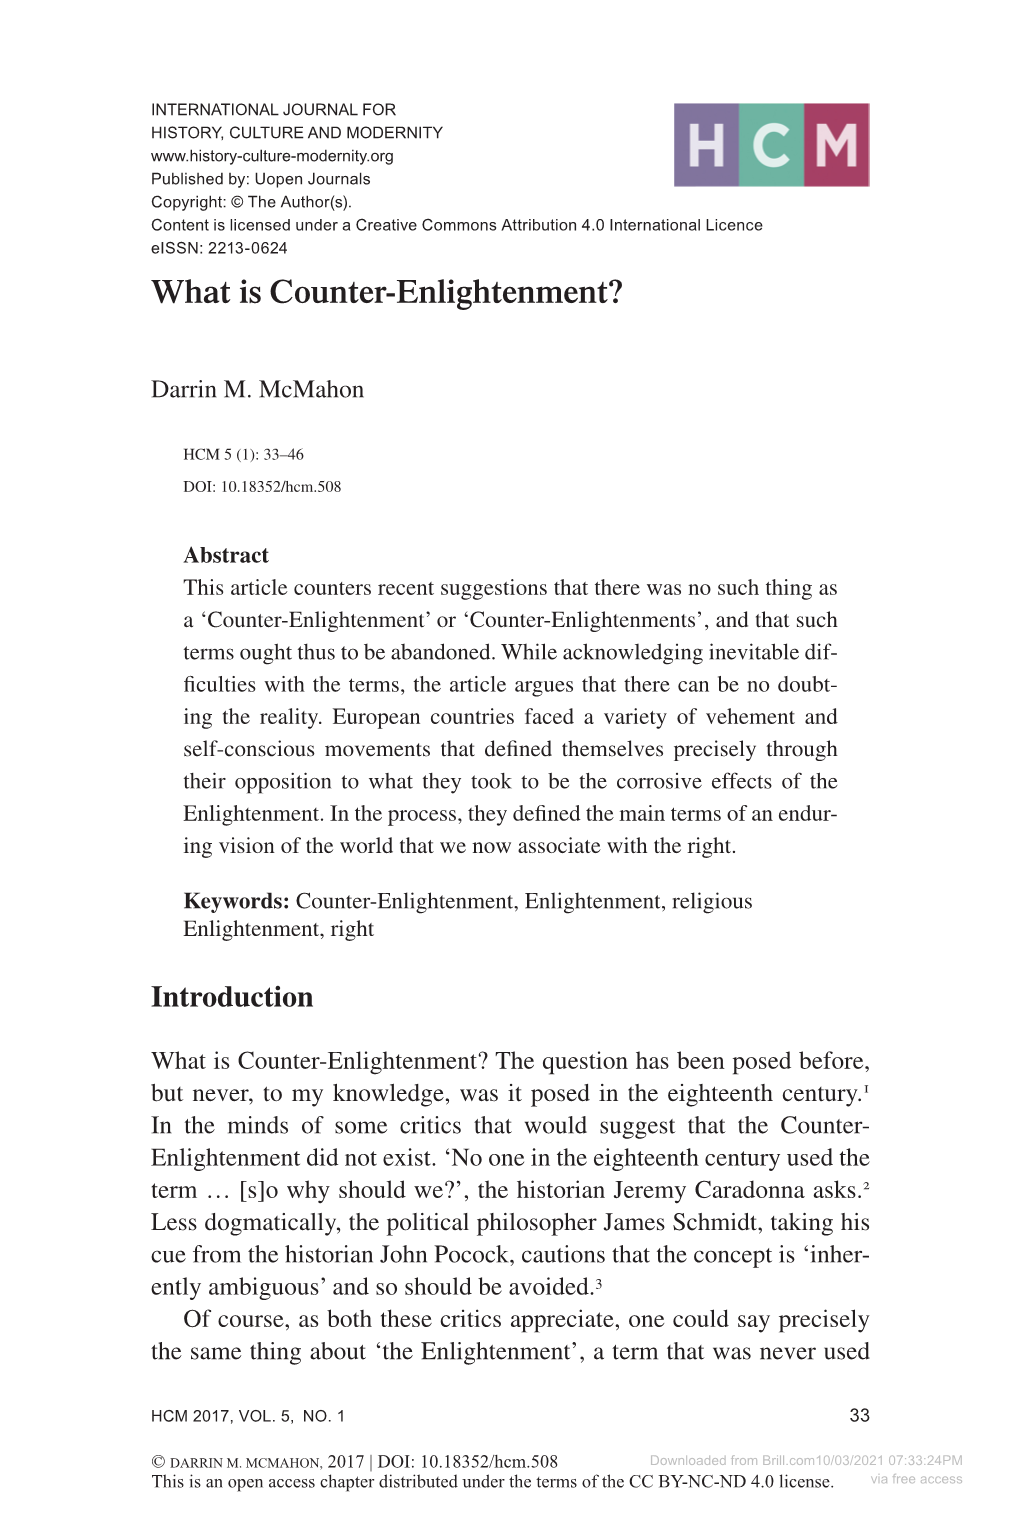 What Is Counter-Enlightenment?